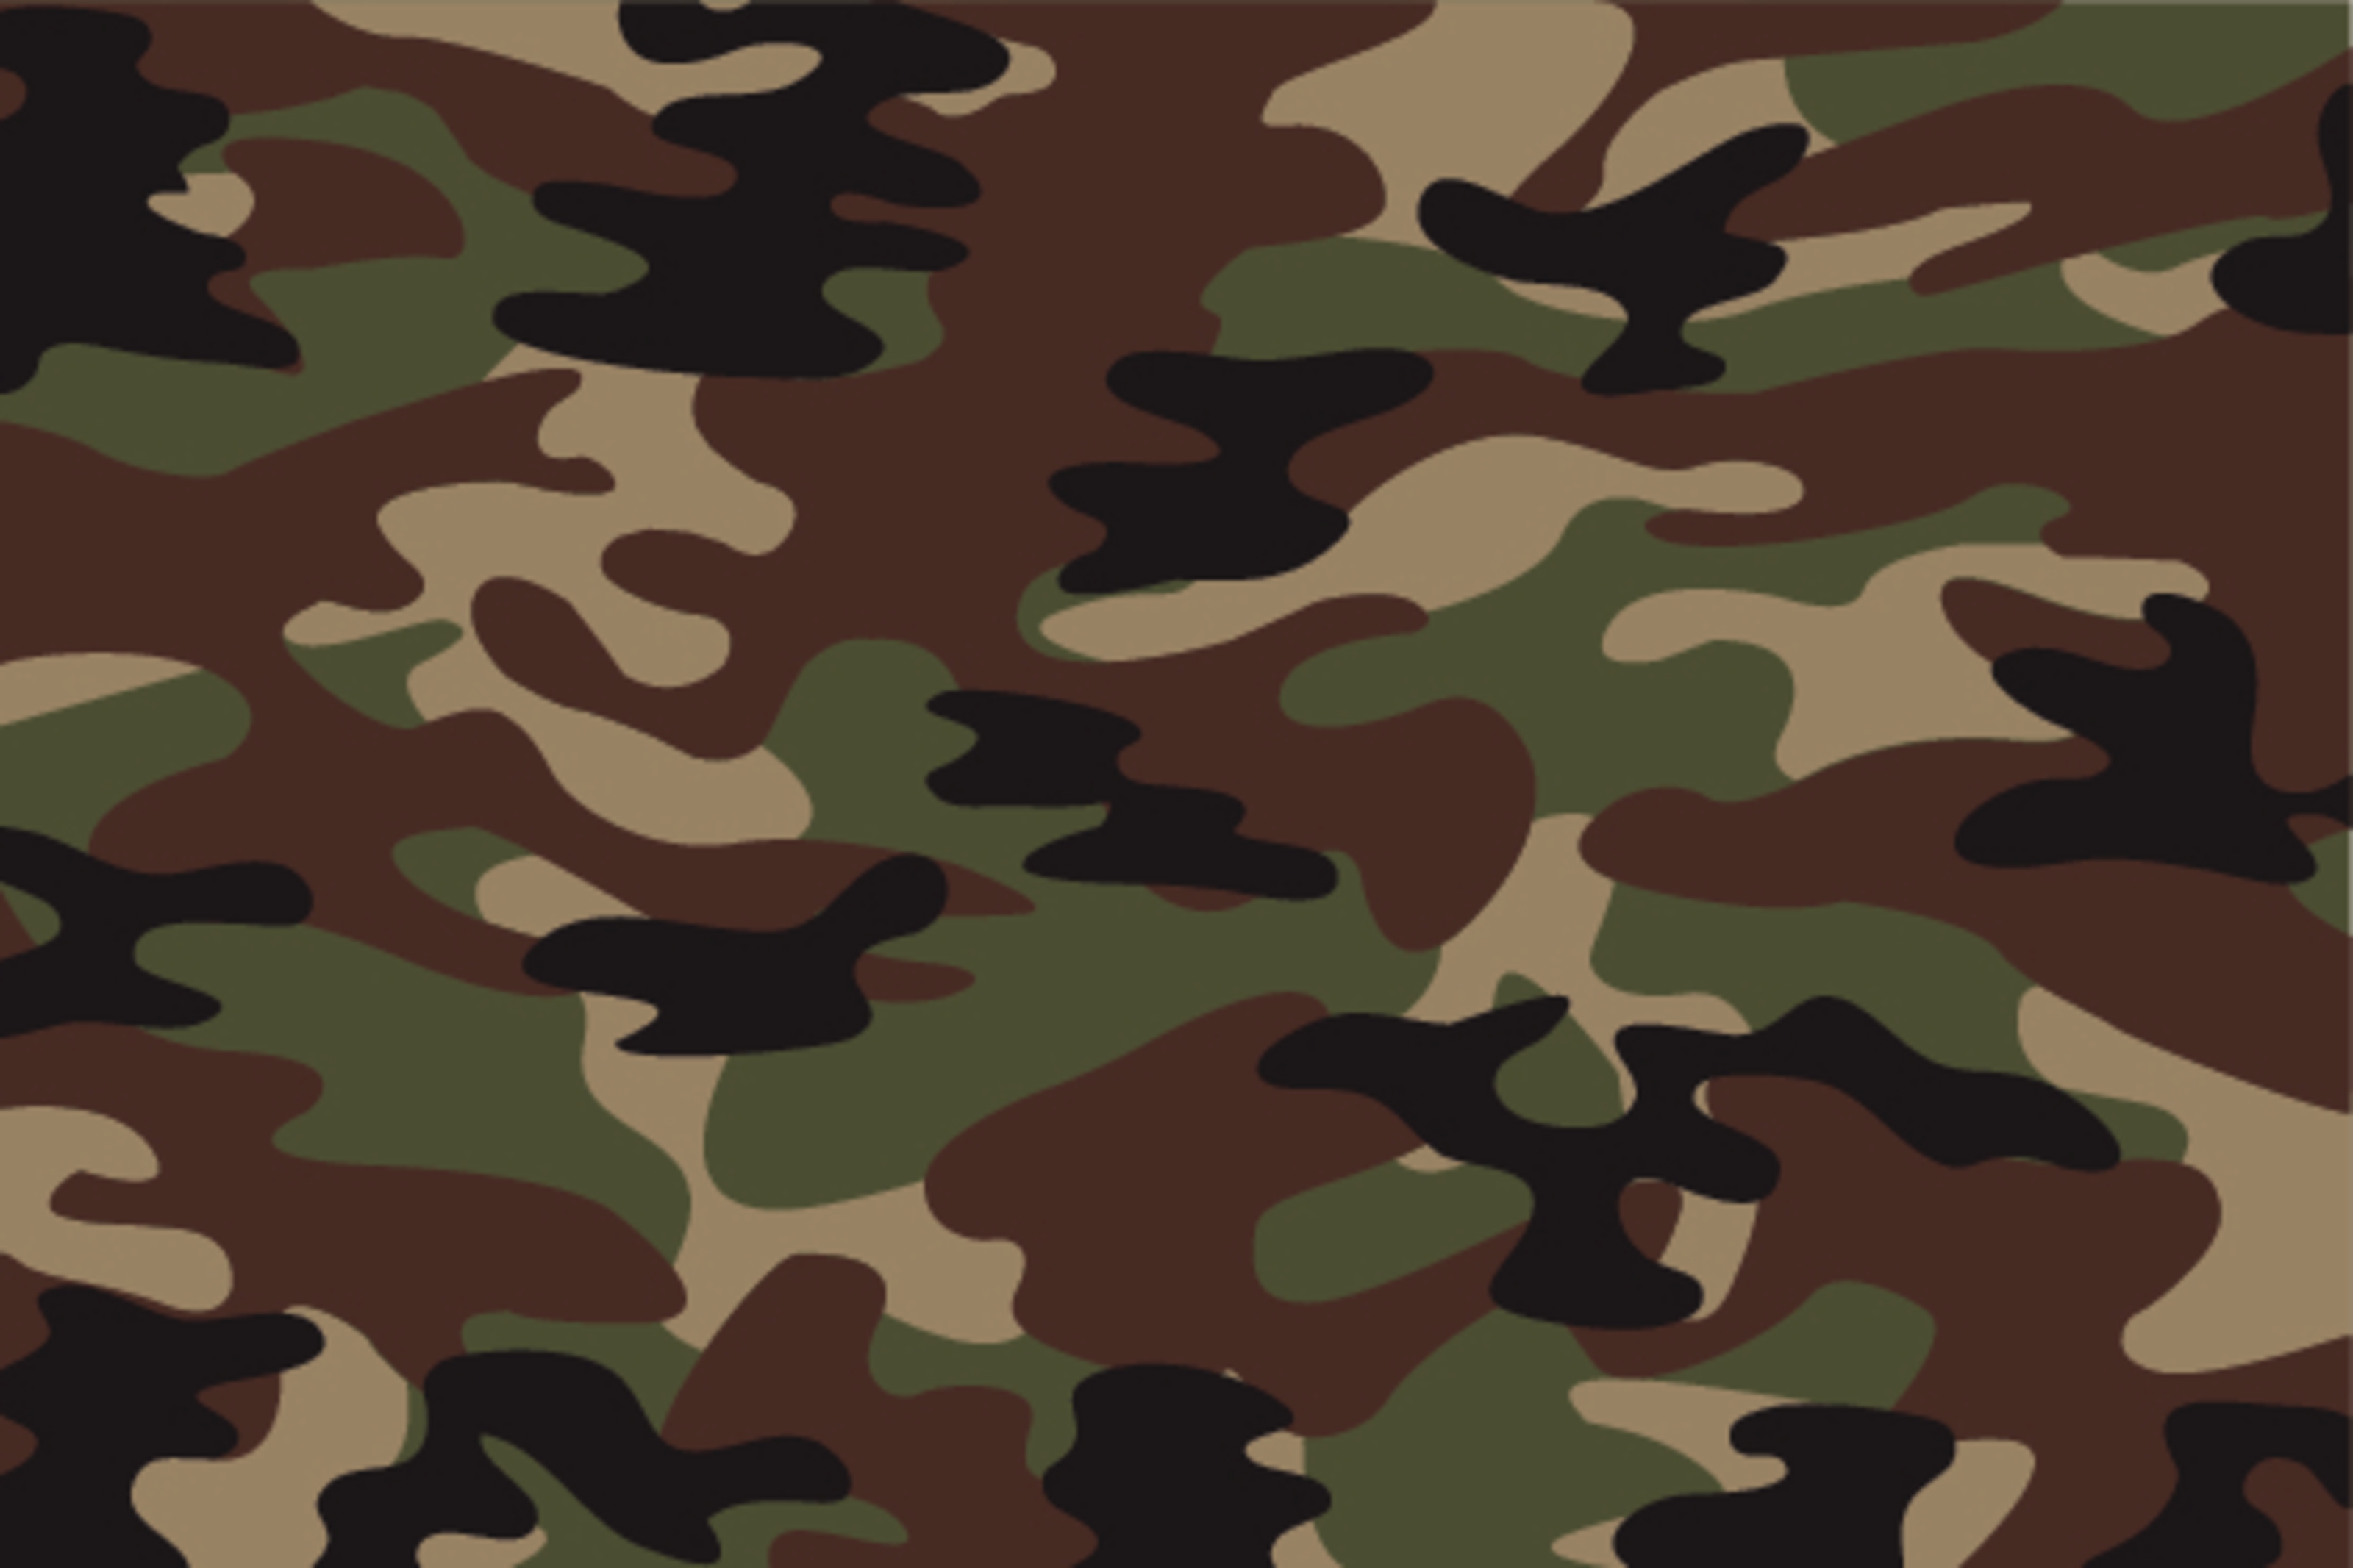 Drake Old School Forest Camo